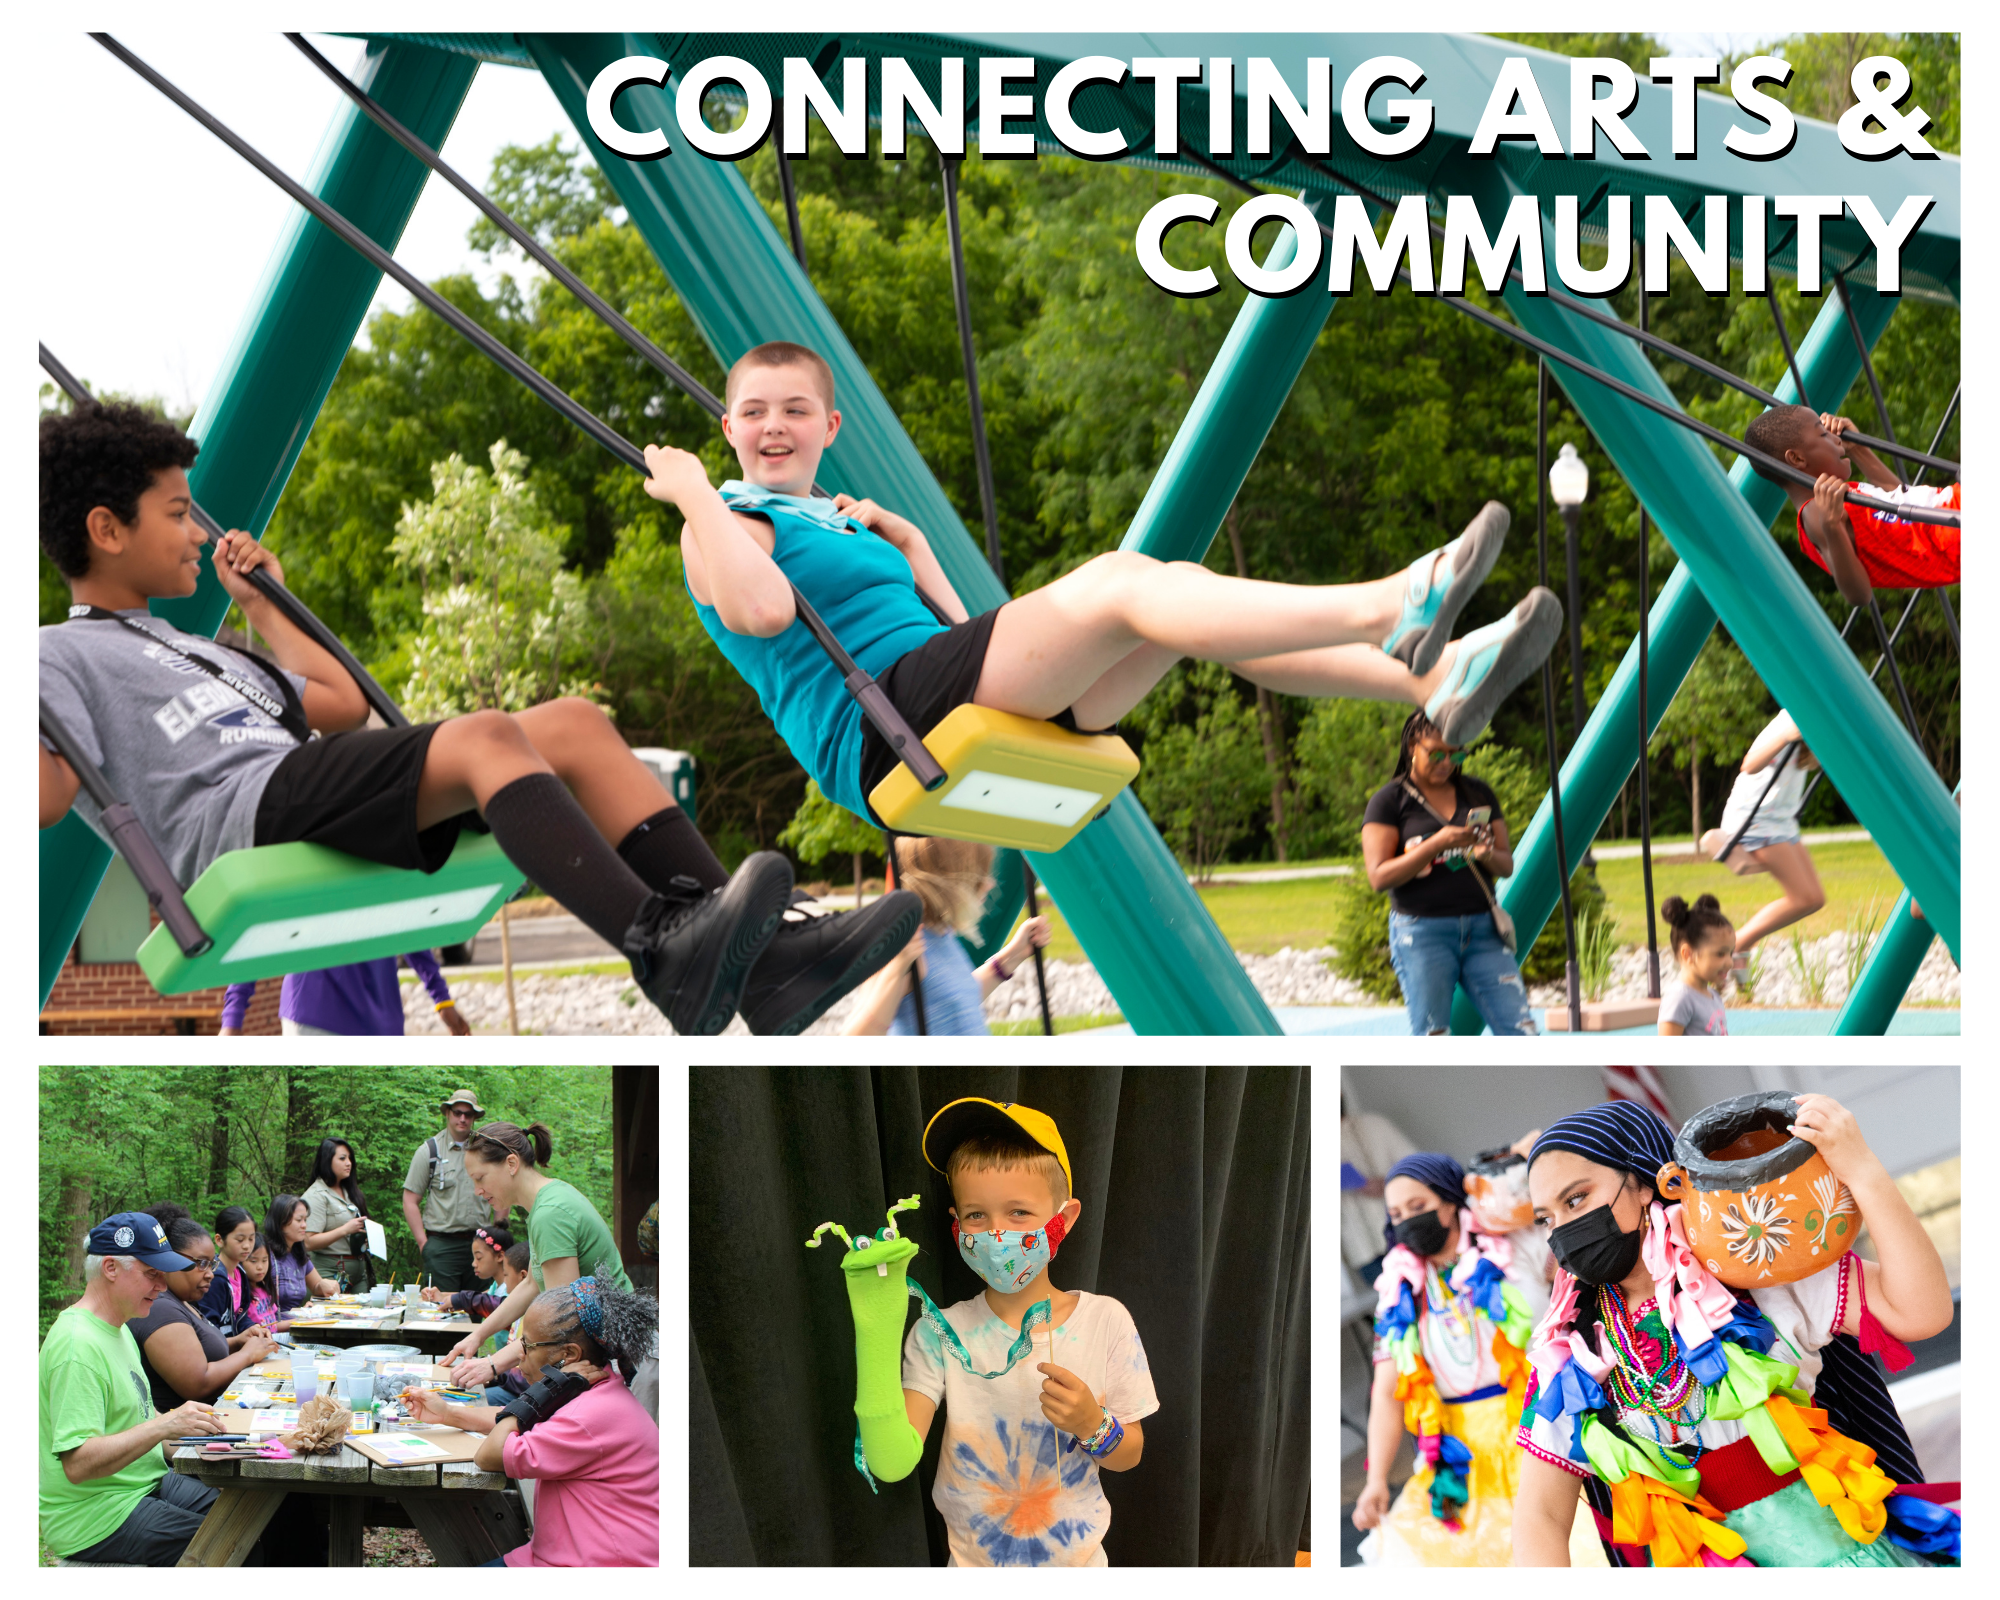 Arts for Lawrence connects arts and community to inspire everyone everyday